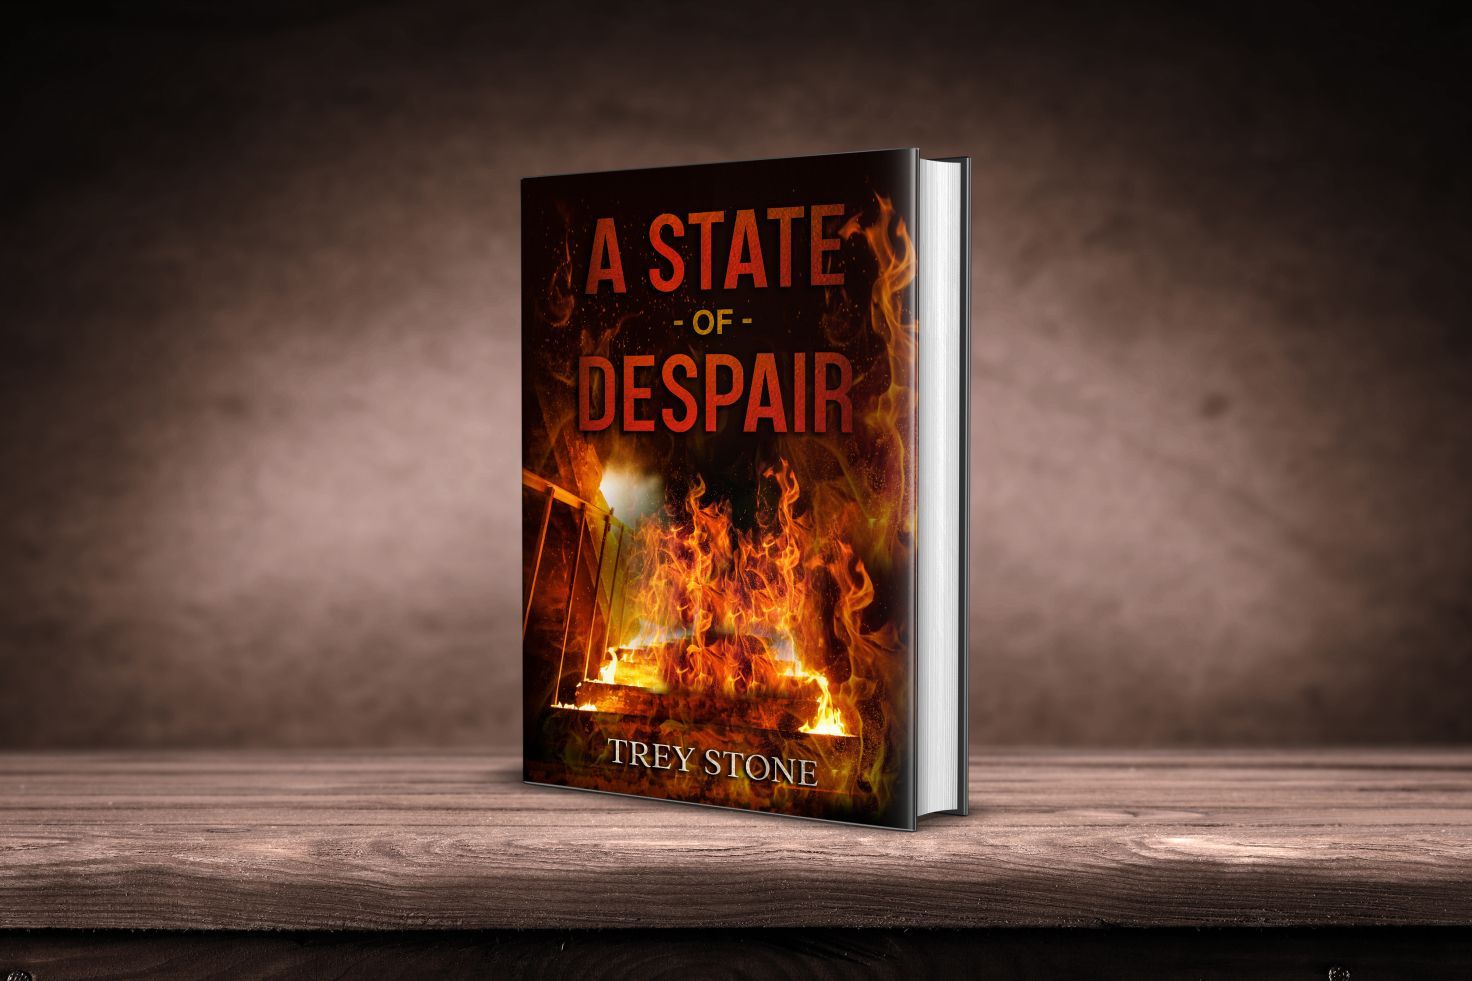 A State of Despair by Trey Stone